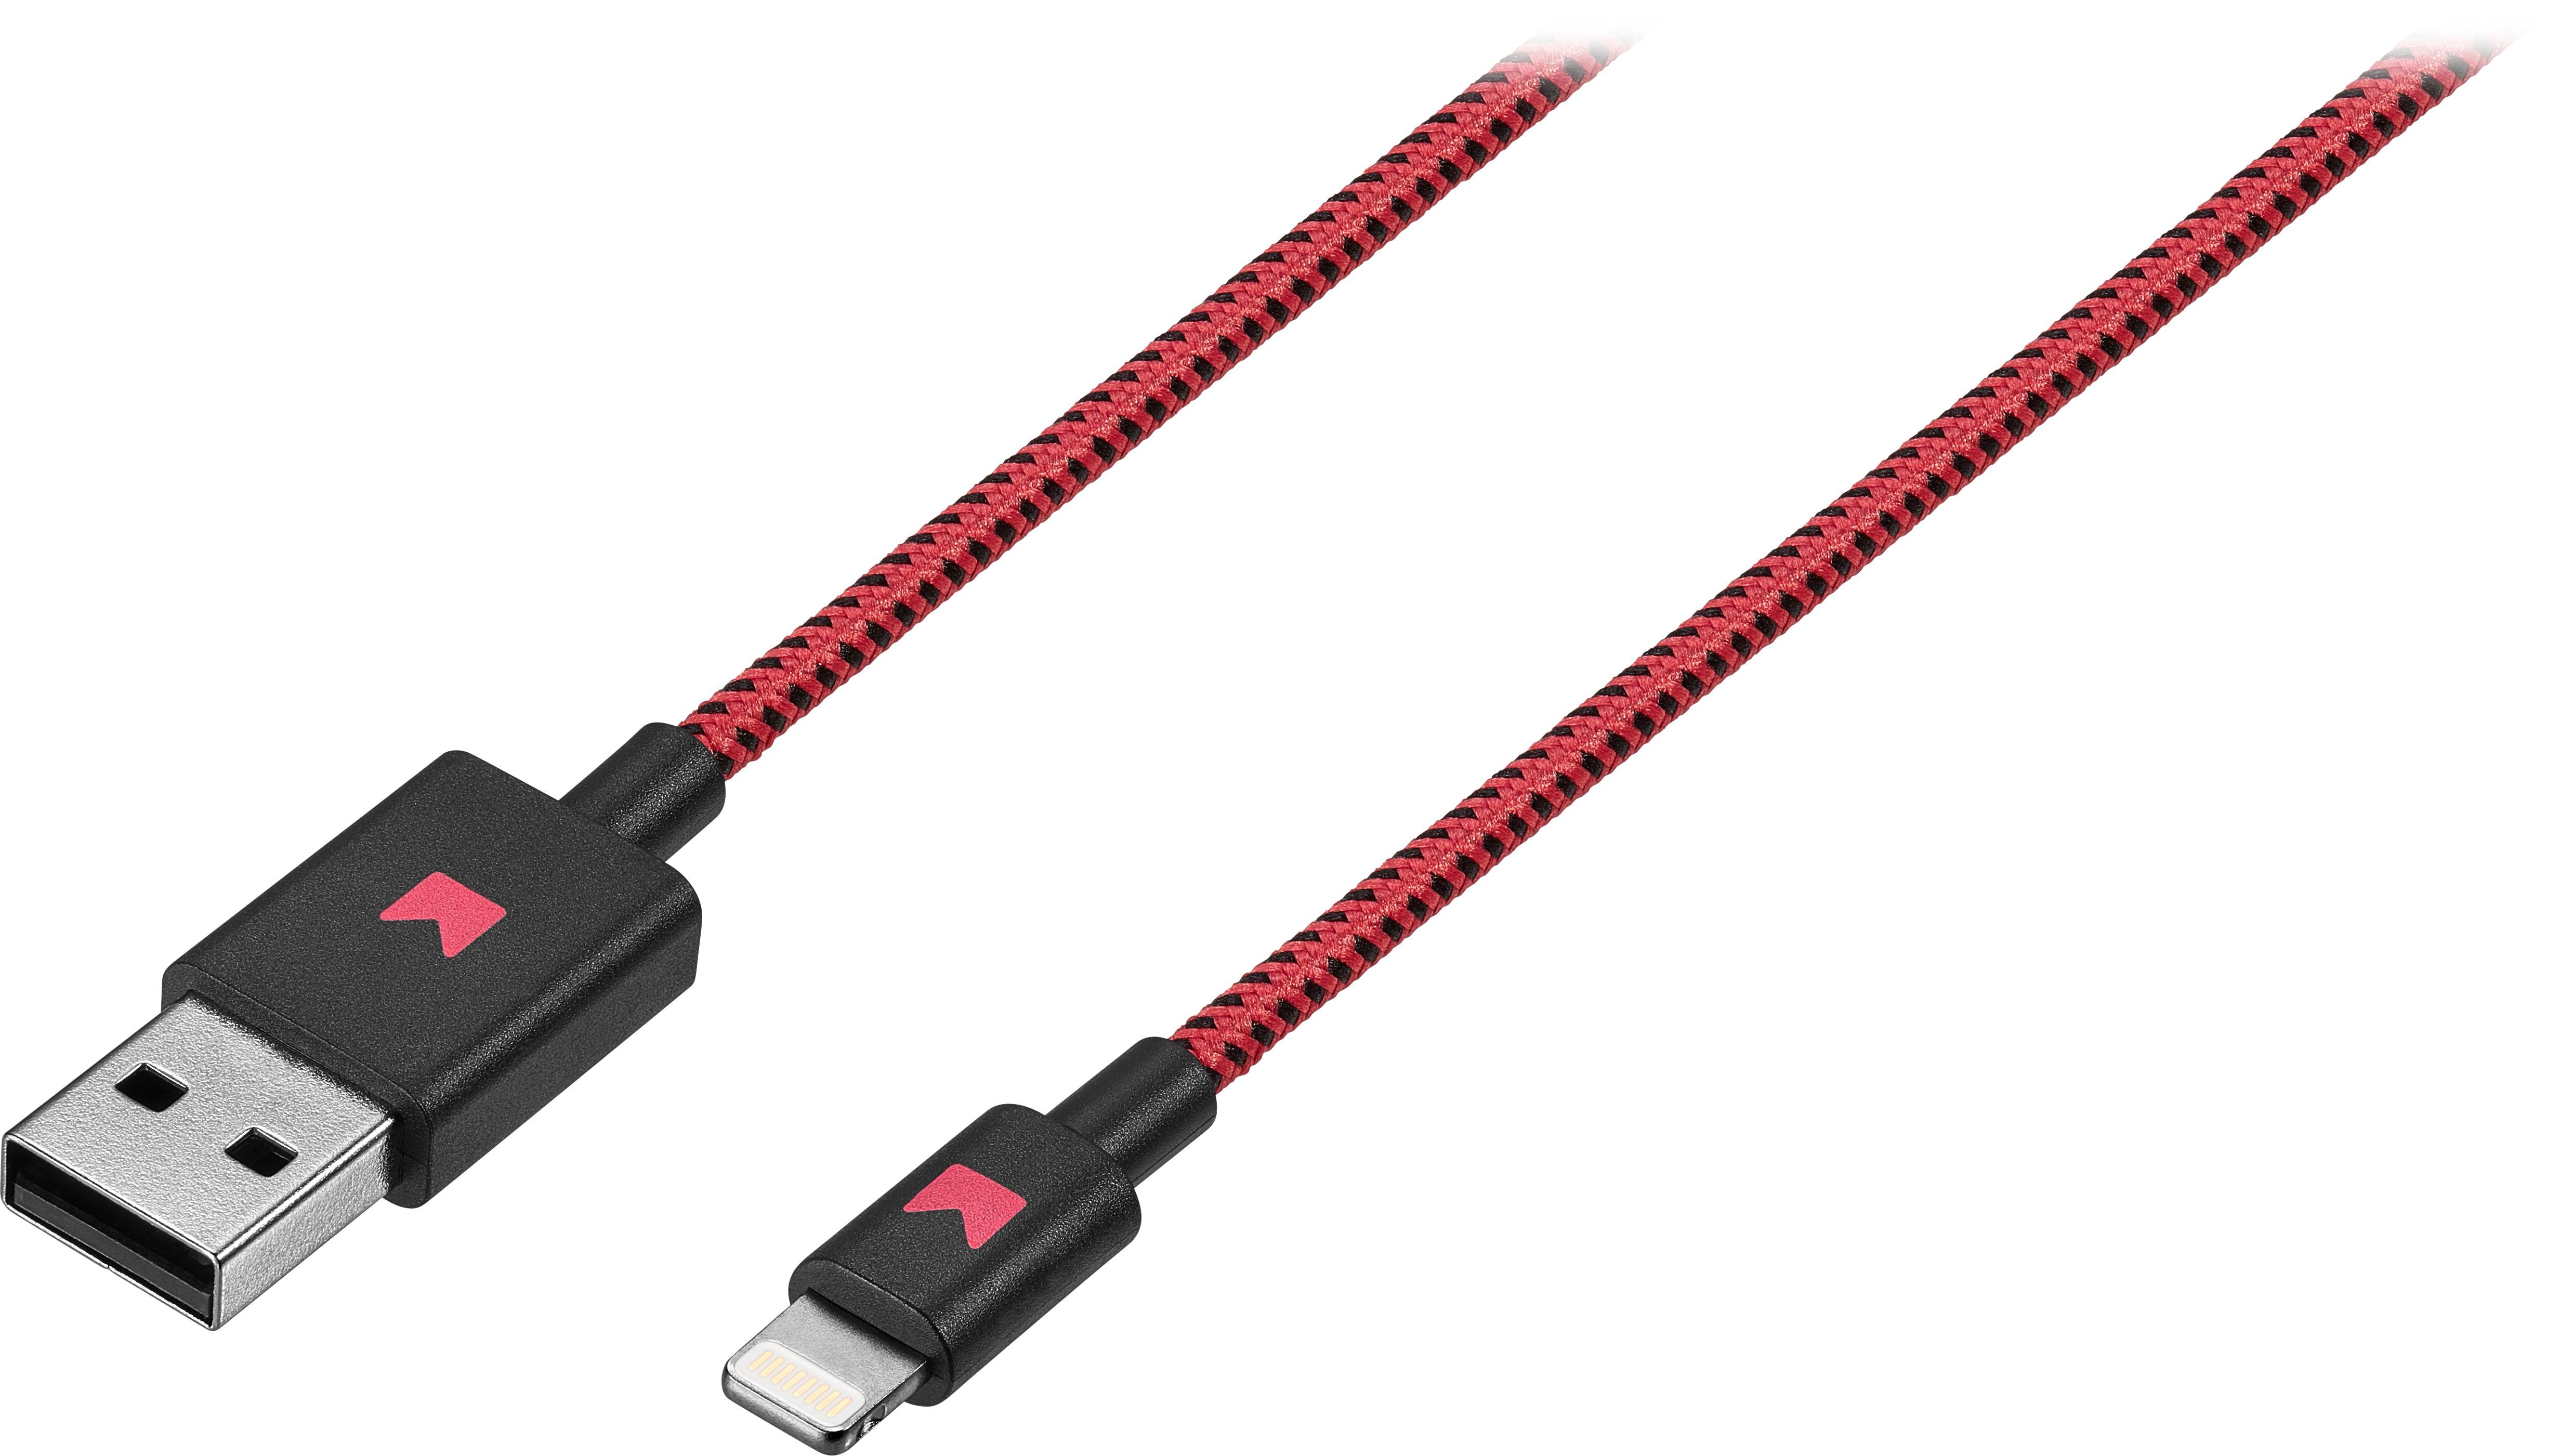 Modalâ„¢ - Apple MFi Certified 4' Lightning USB Charging Cable - Black/Red was $19.99 now $12.99 (35.0% off)